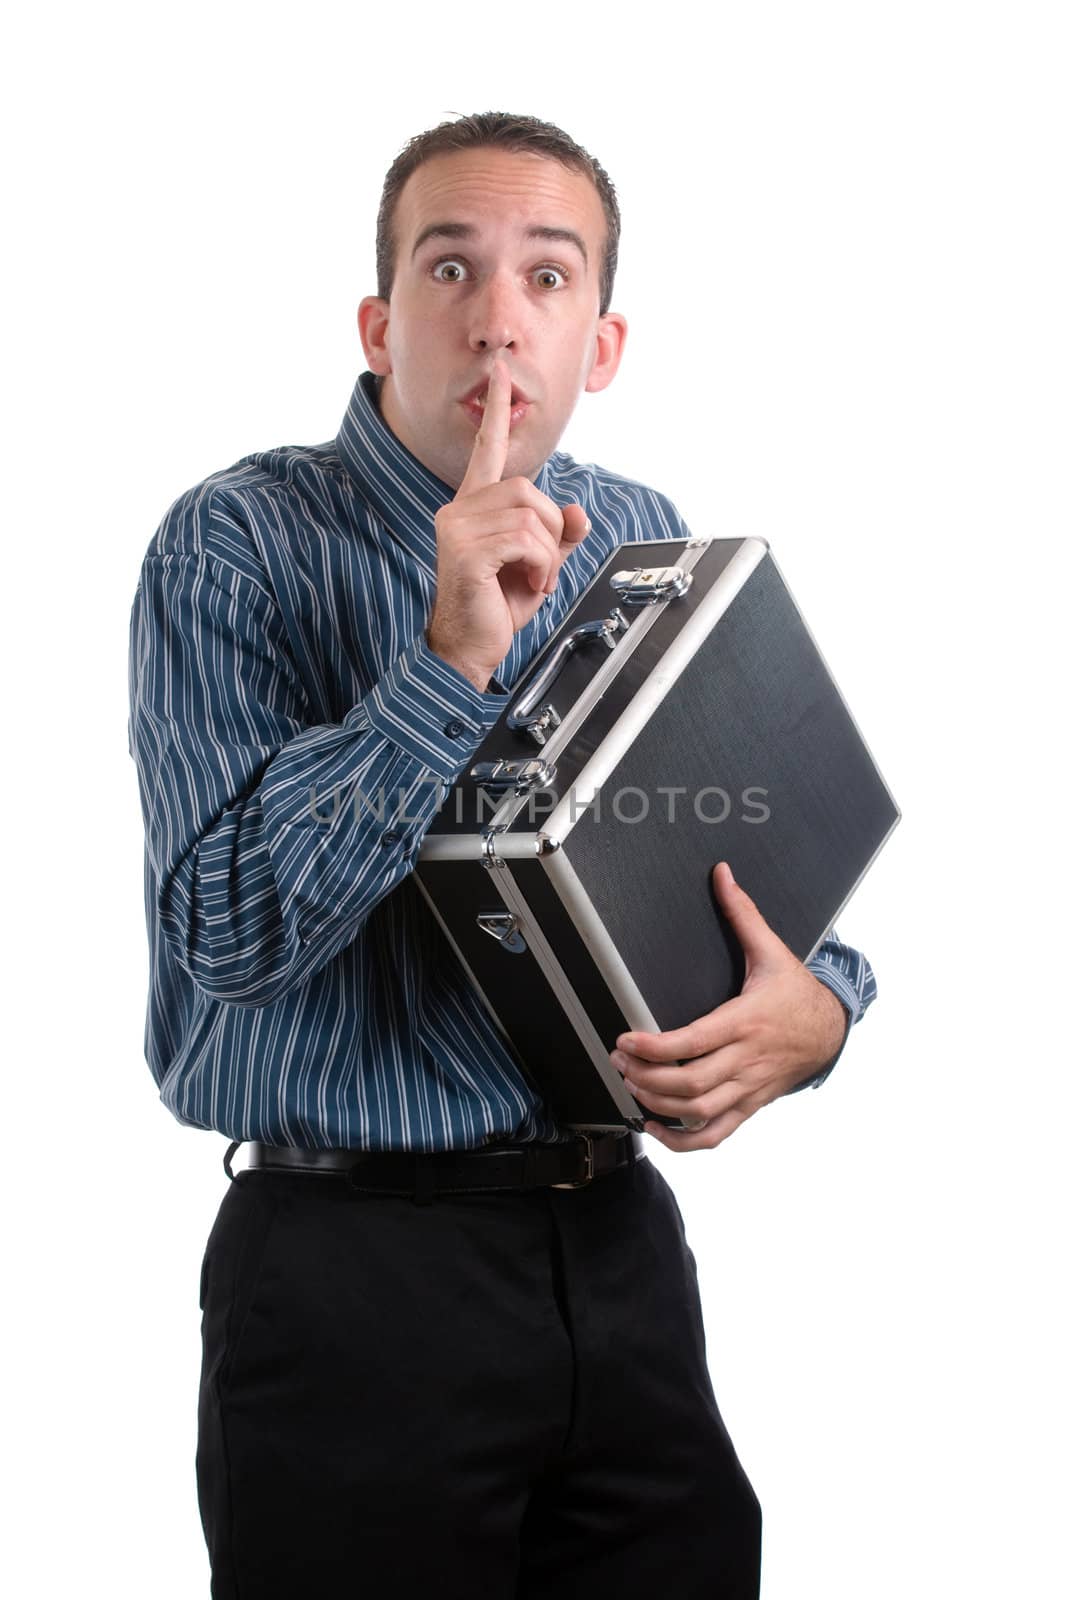 A young employee is sneaking away a case of private documents and telling the viewer to be quiet, isolated against a white background